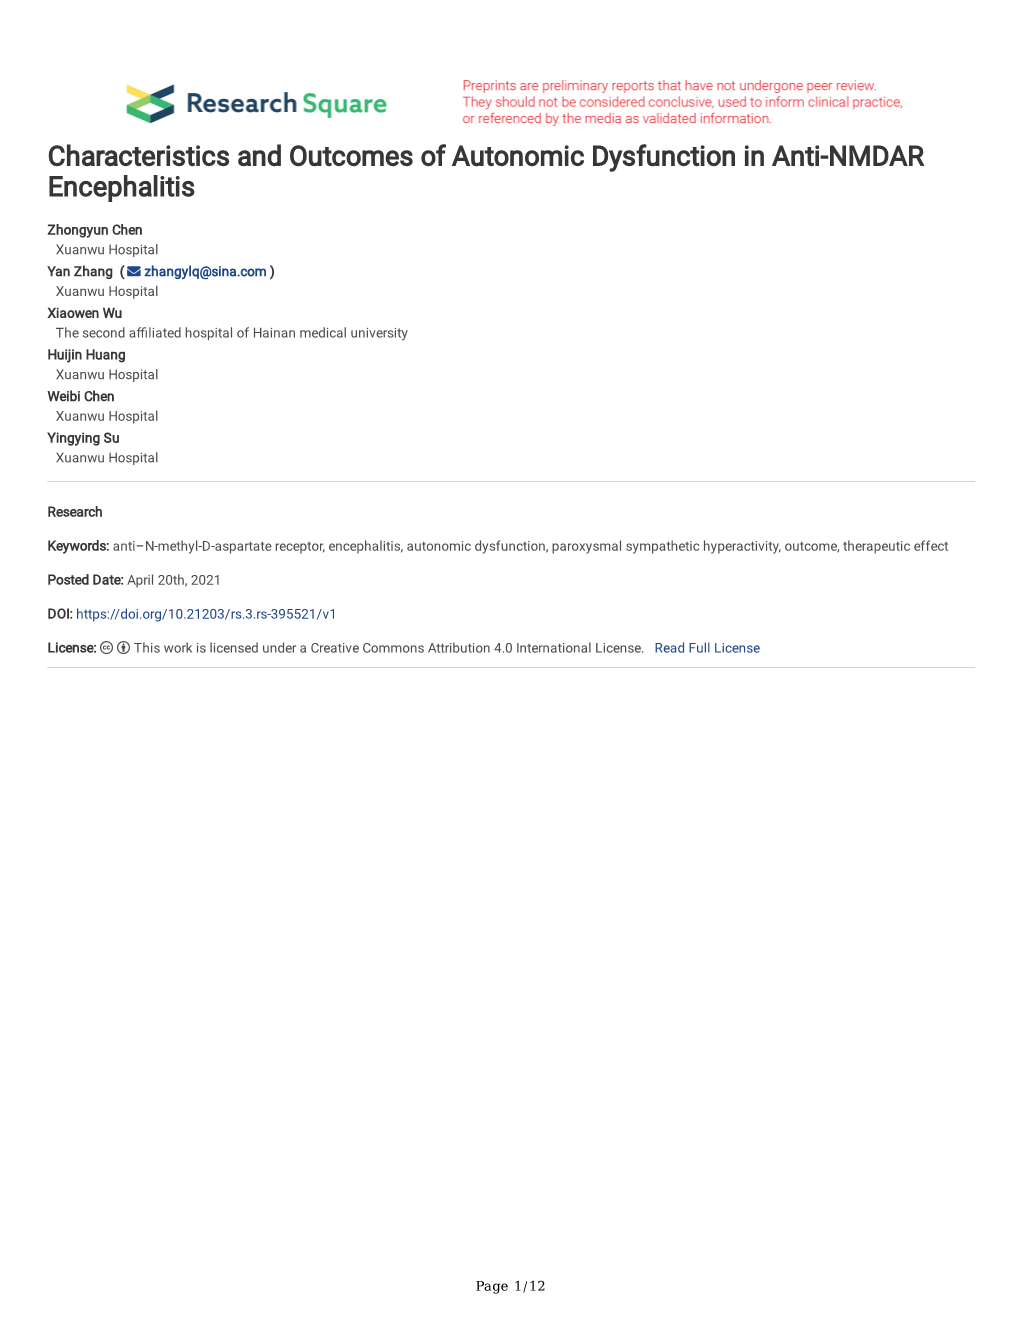 Characteristics and Outcomes of Autonomic Dysfunction in Anti-NMDAR Encephalitis